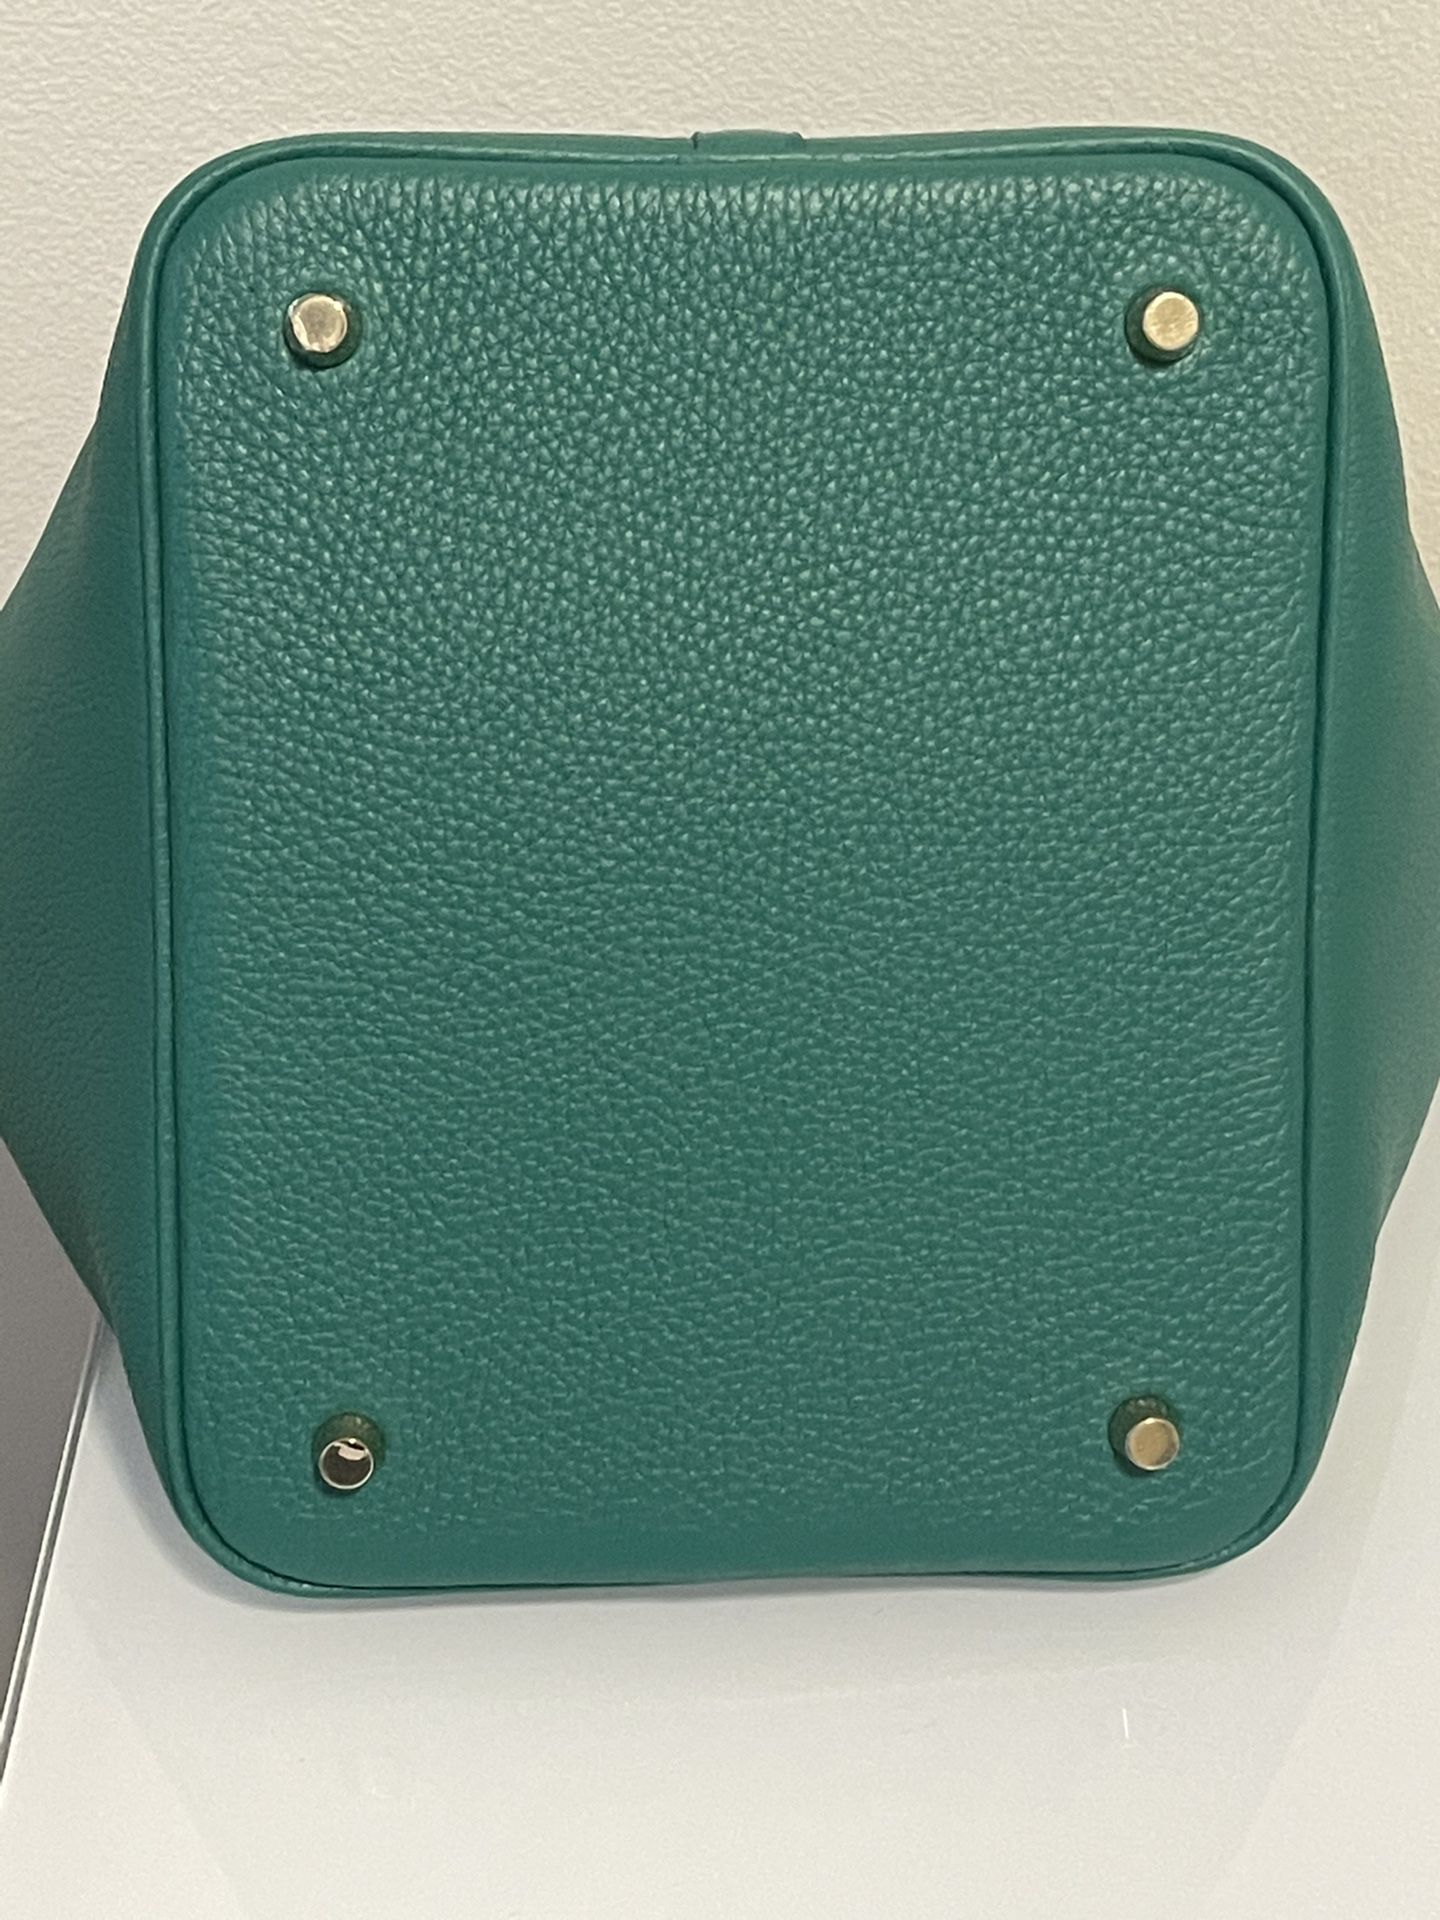 Authentic Hermes Picotin BagGM 26 for Sale in Peoria, AZ - OfferUp